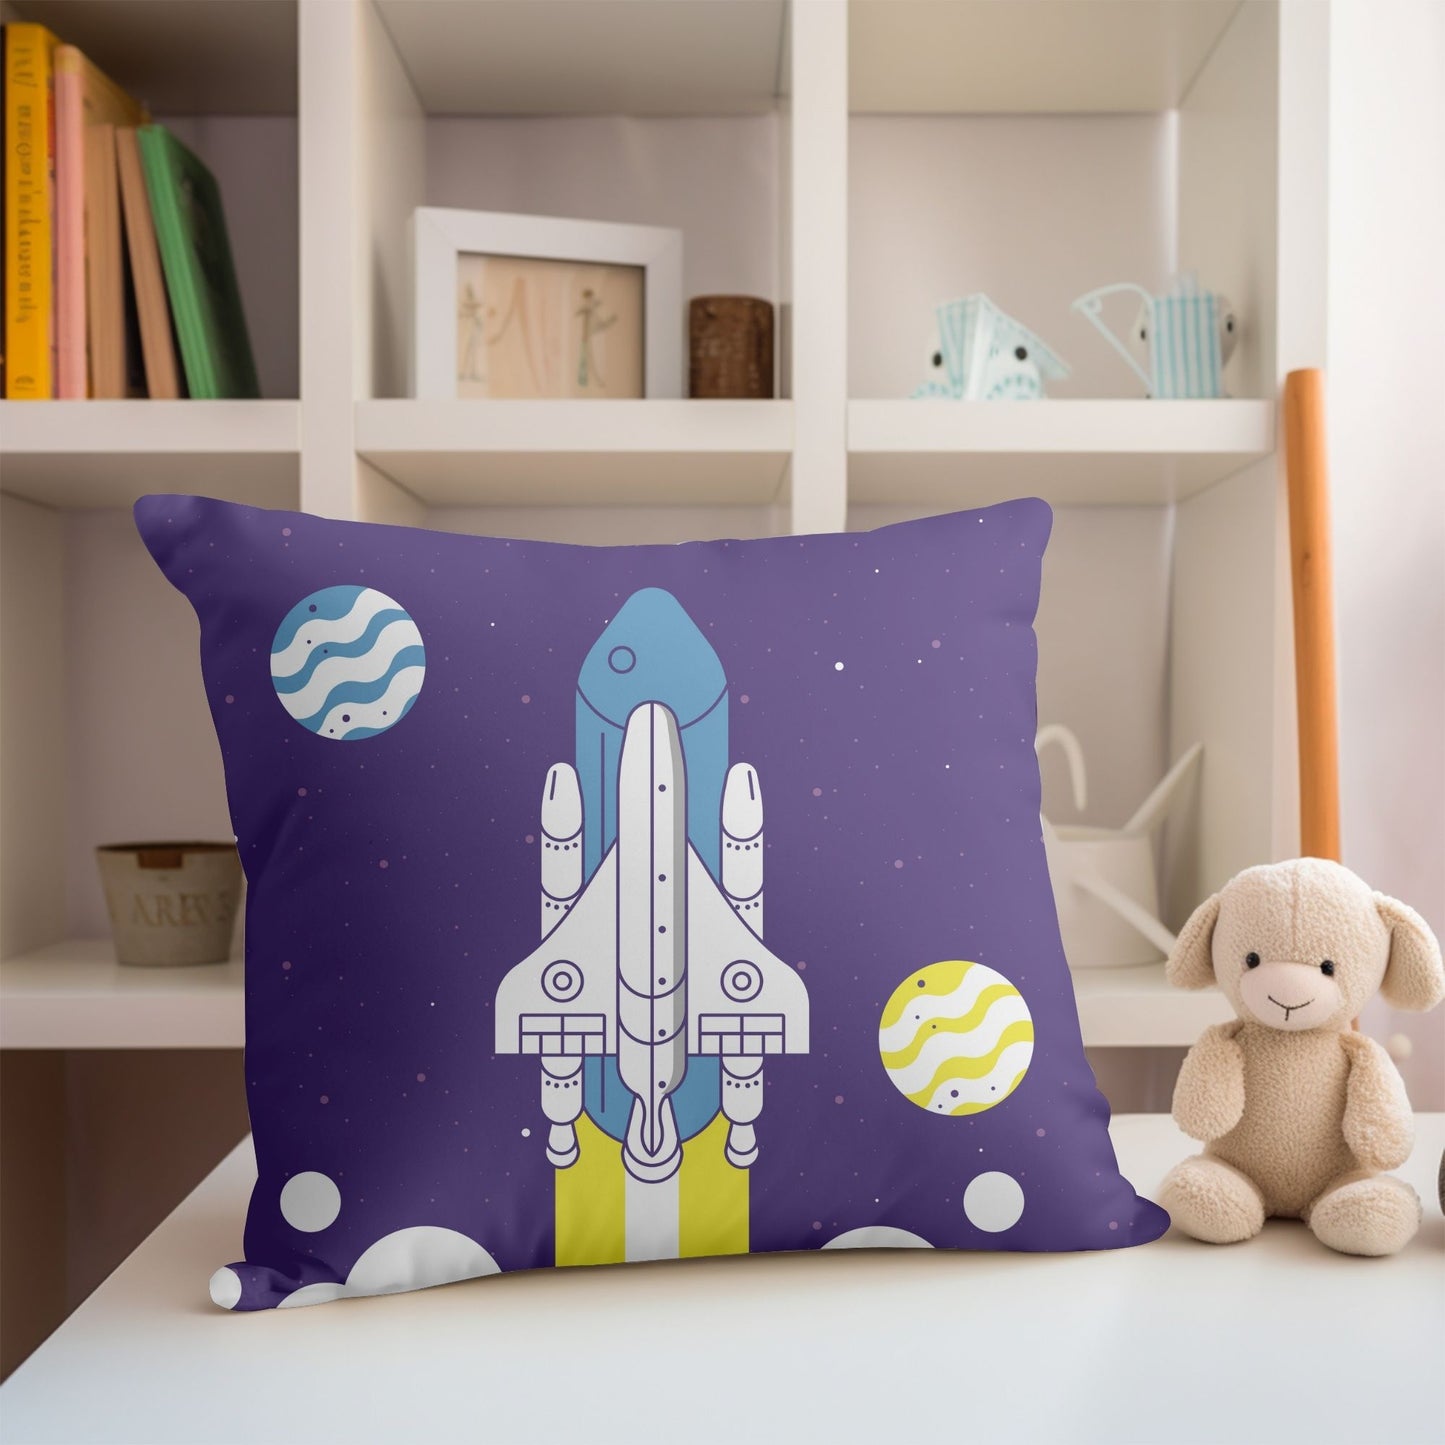 Fun-filled pillow featuring a rocket ship taking off for kids' spaces.